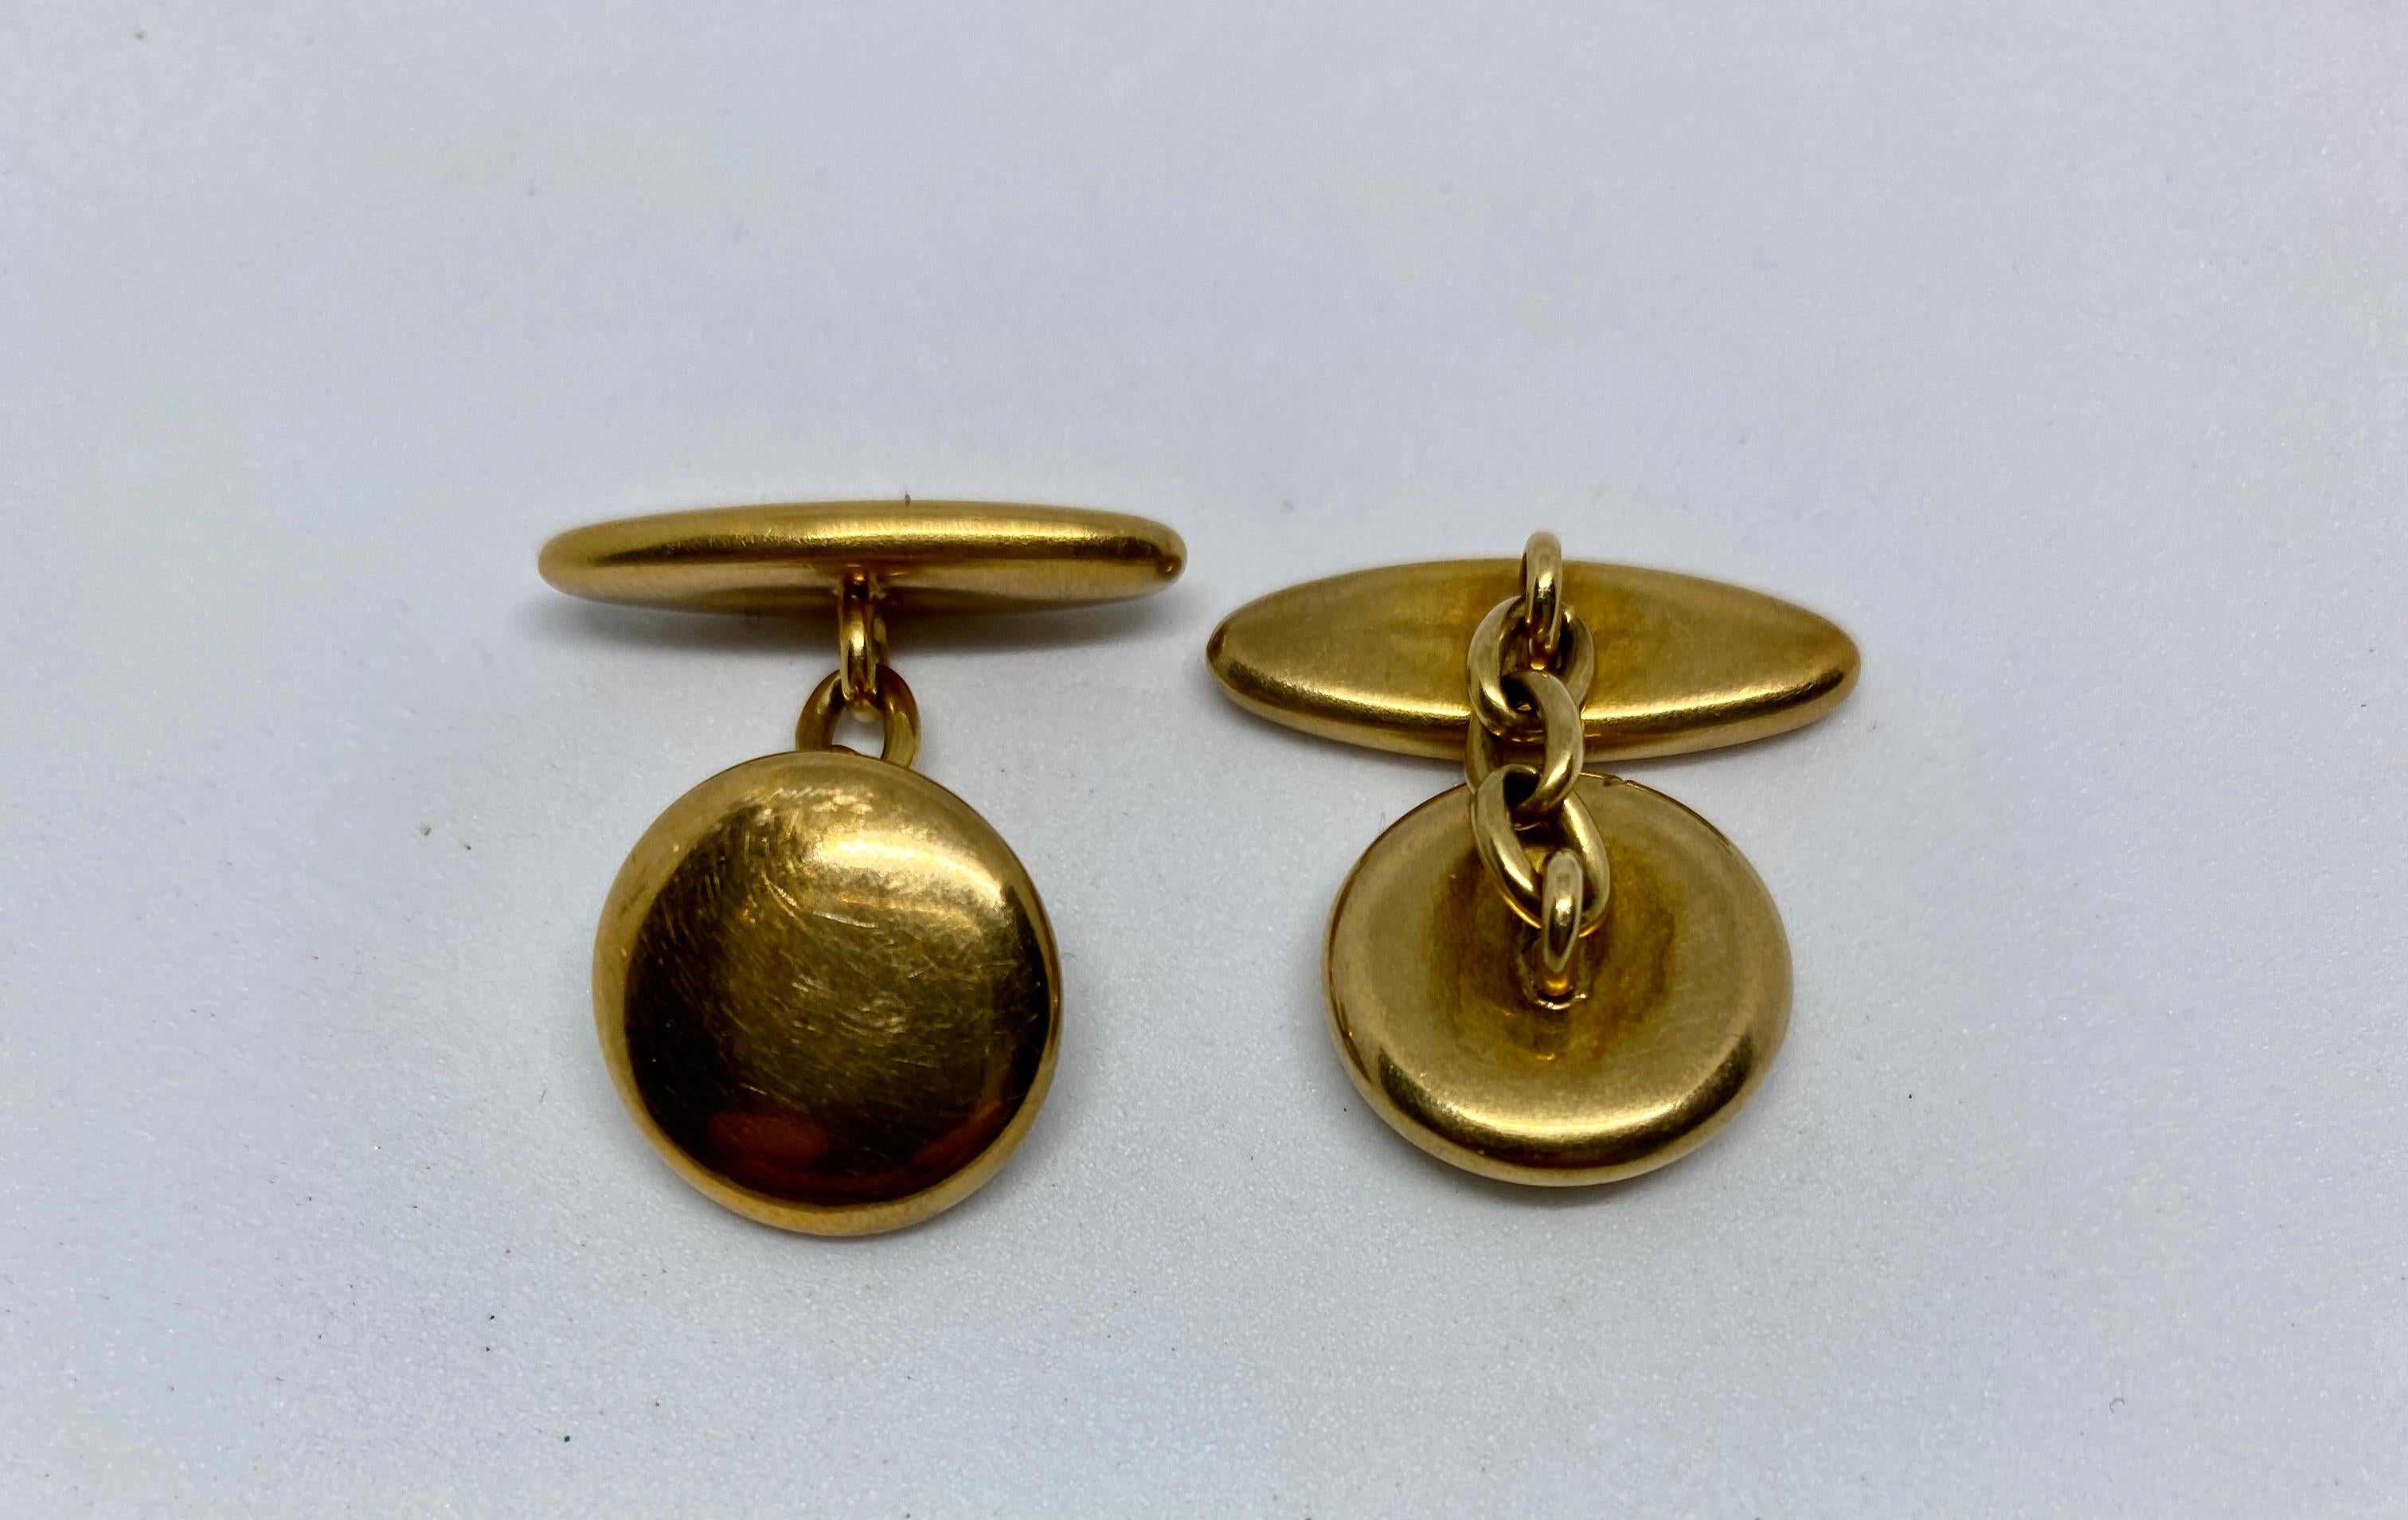 A simple, classic pair of antique cufflinks featuring round faces, oblong backs and chain connectors, all in solid, 14K yellow gold.

The cufflink faces measure 13.5mm in diameter; the oval backs measure 20mm by 6.8mm. Together the cufflinks weigh